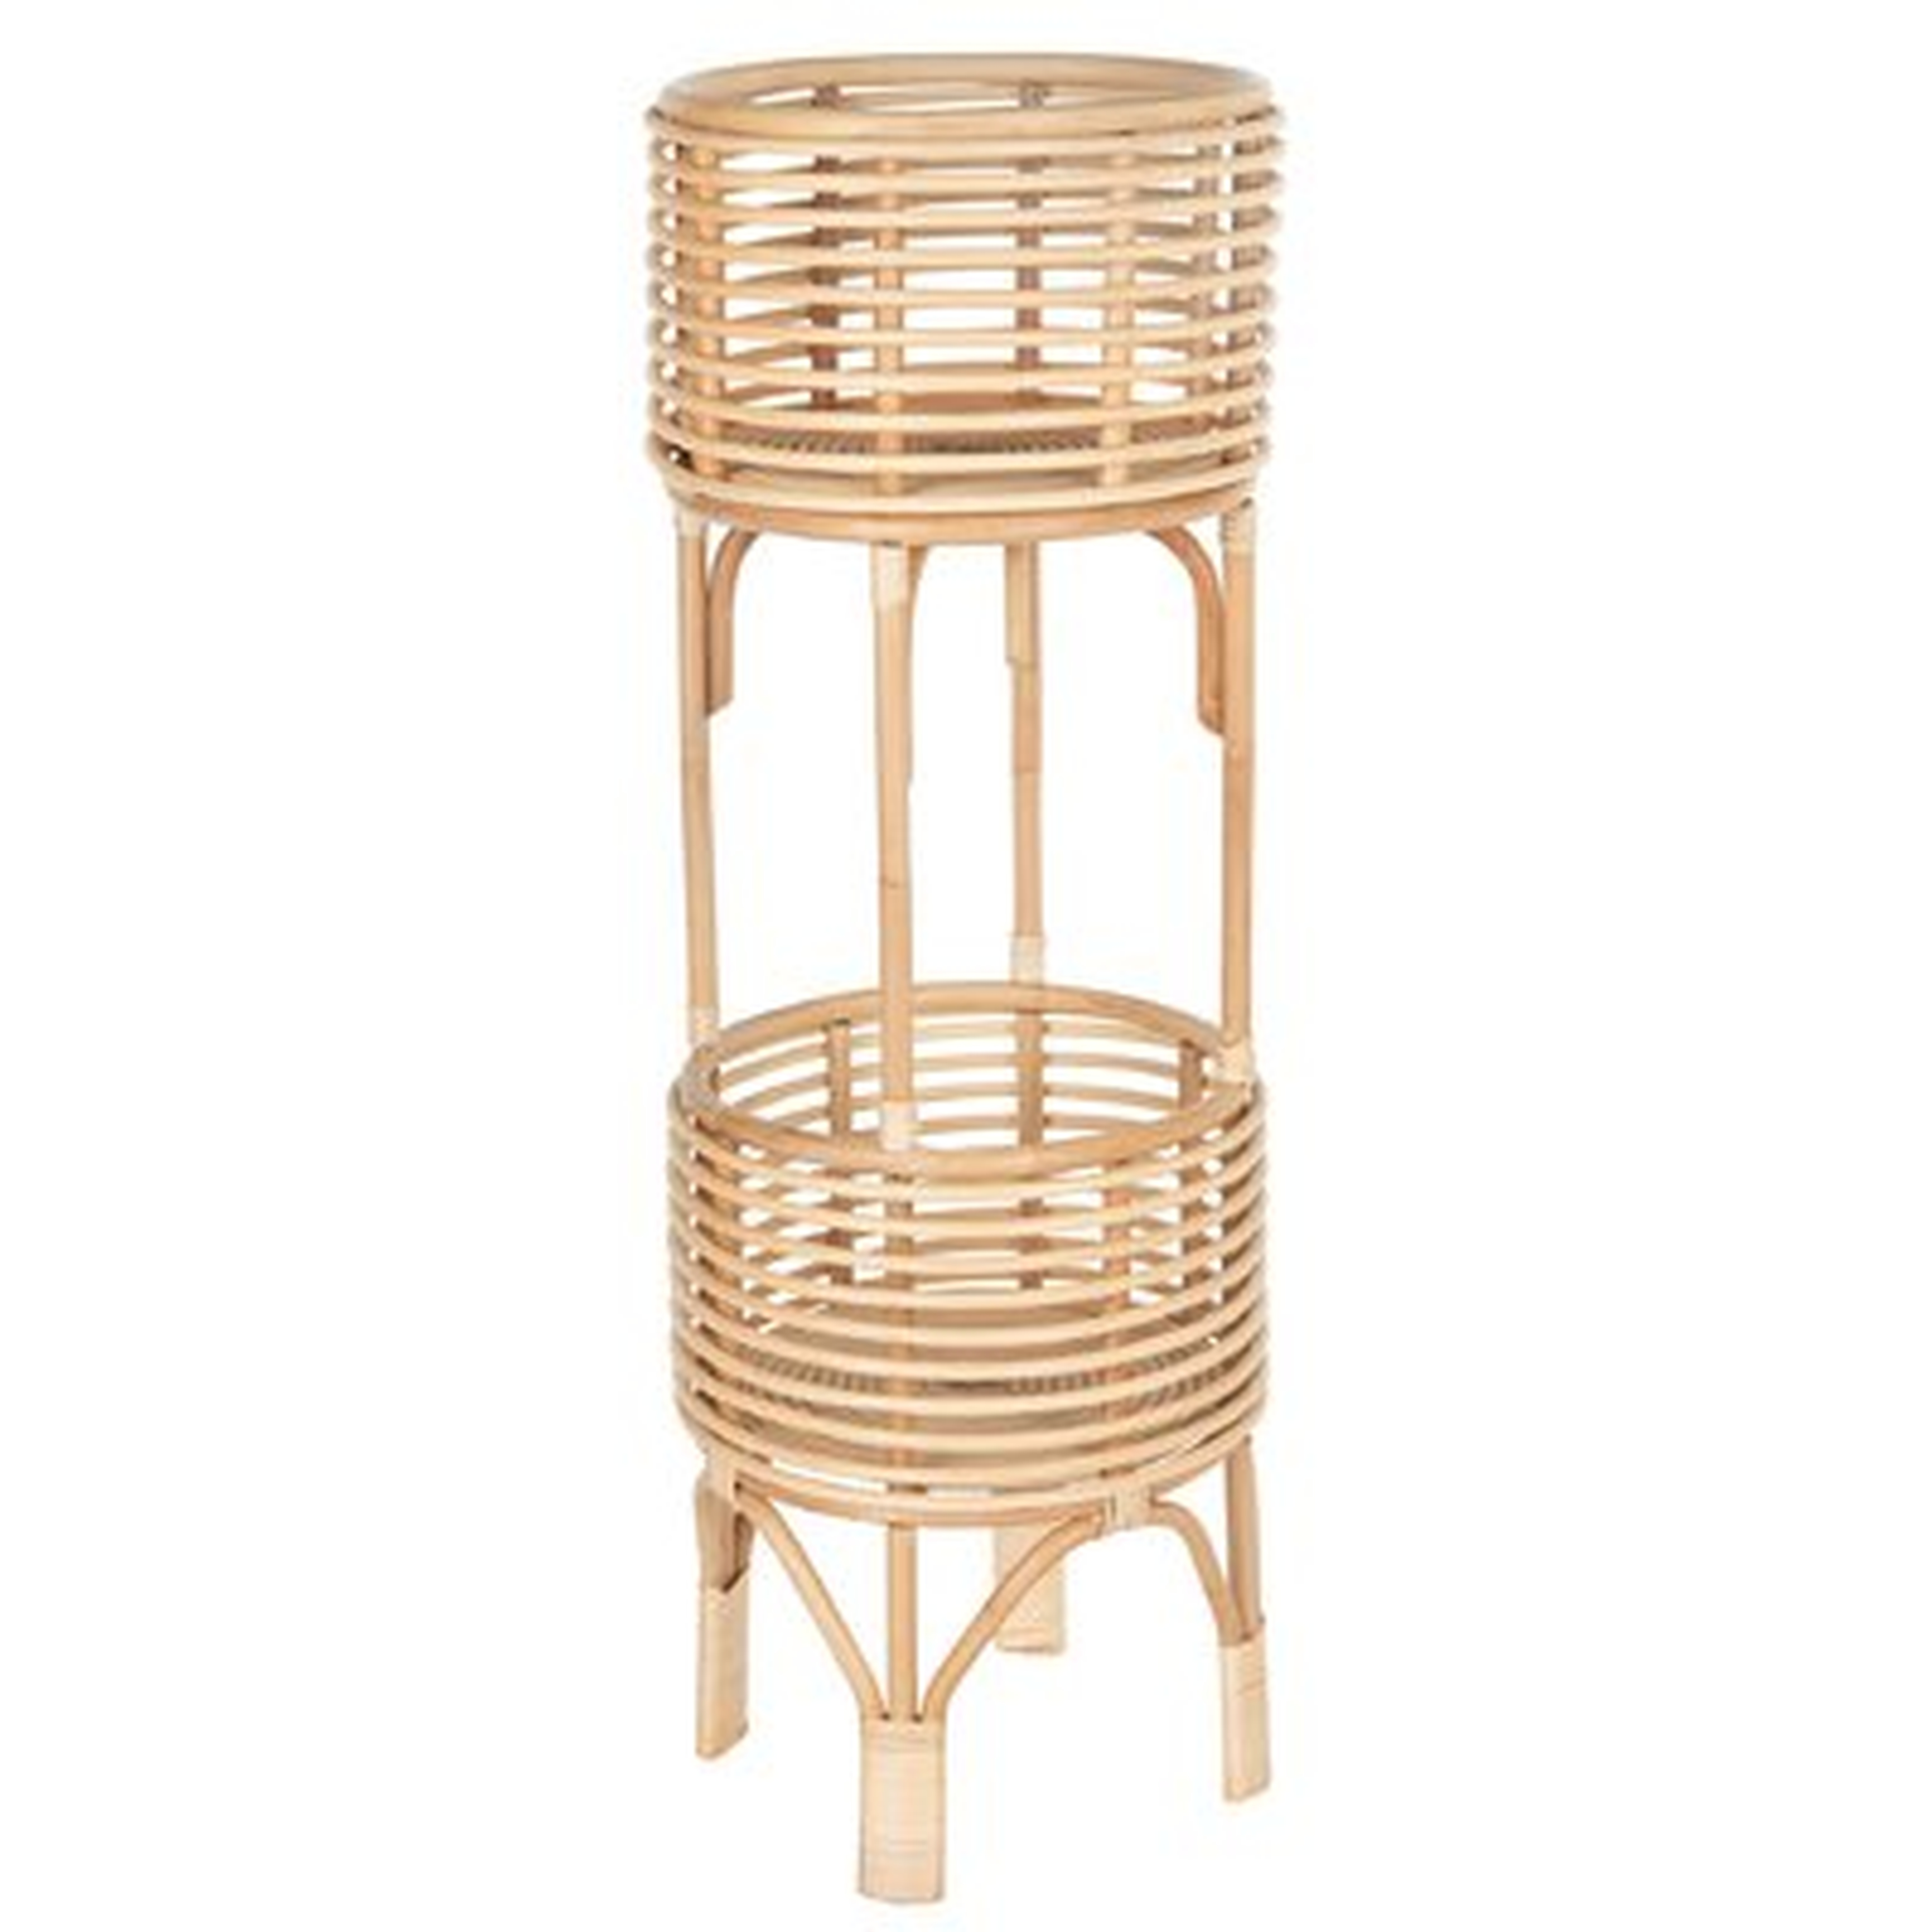 Andres 36" H x 12" L x 12" D Rattan Indoor Plant Stand, 10 inches, Natural - Wayfair